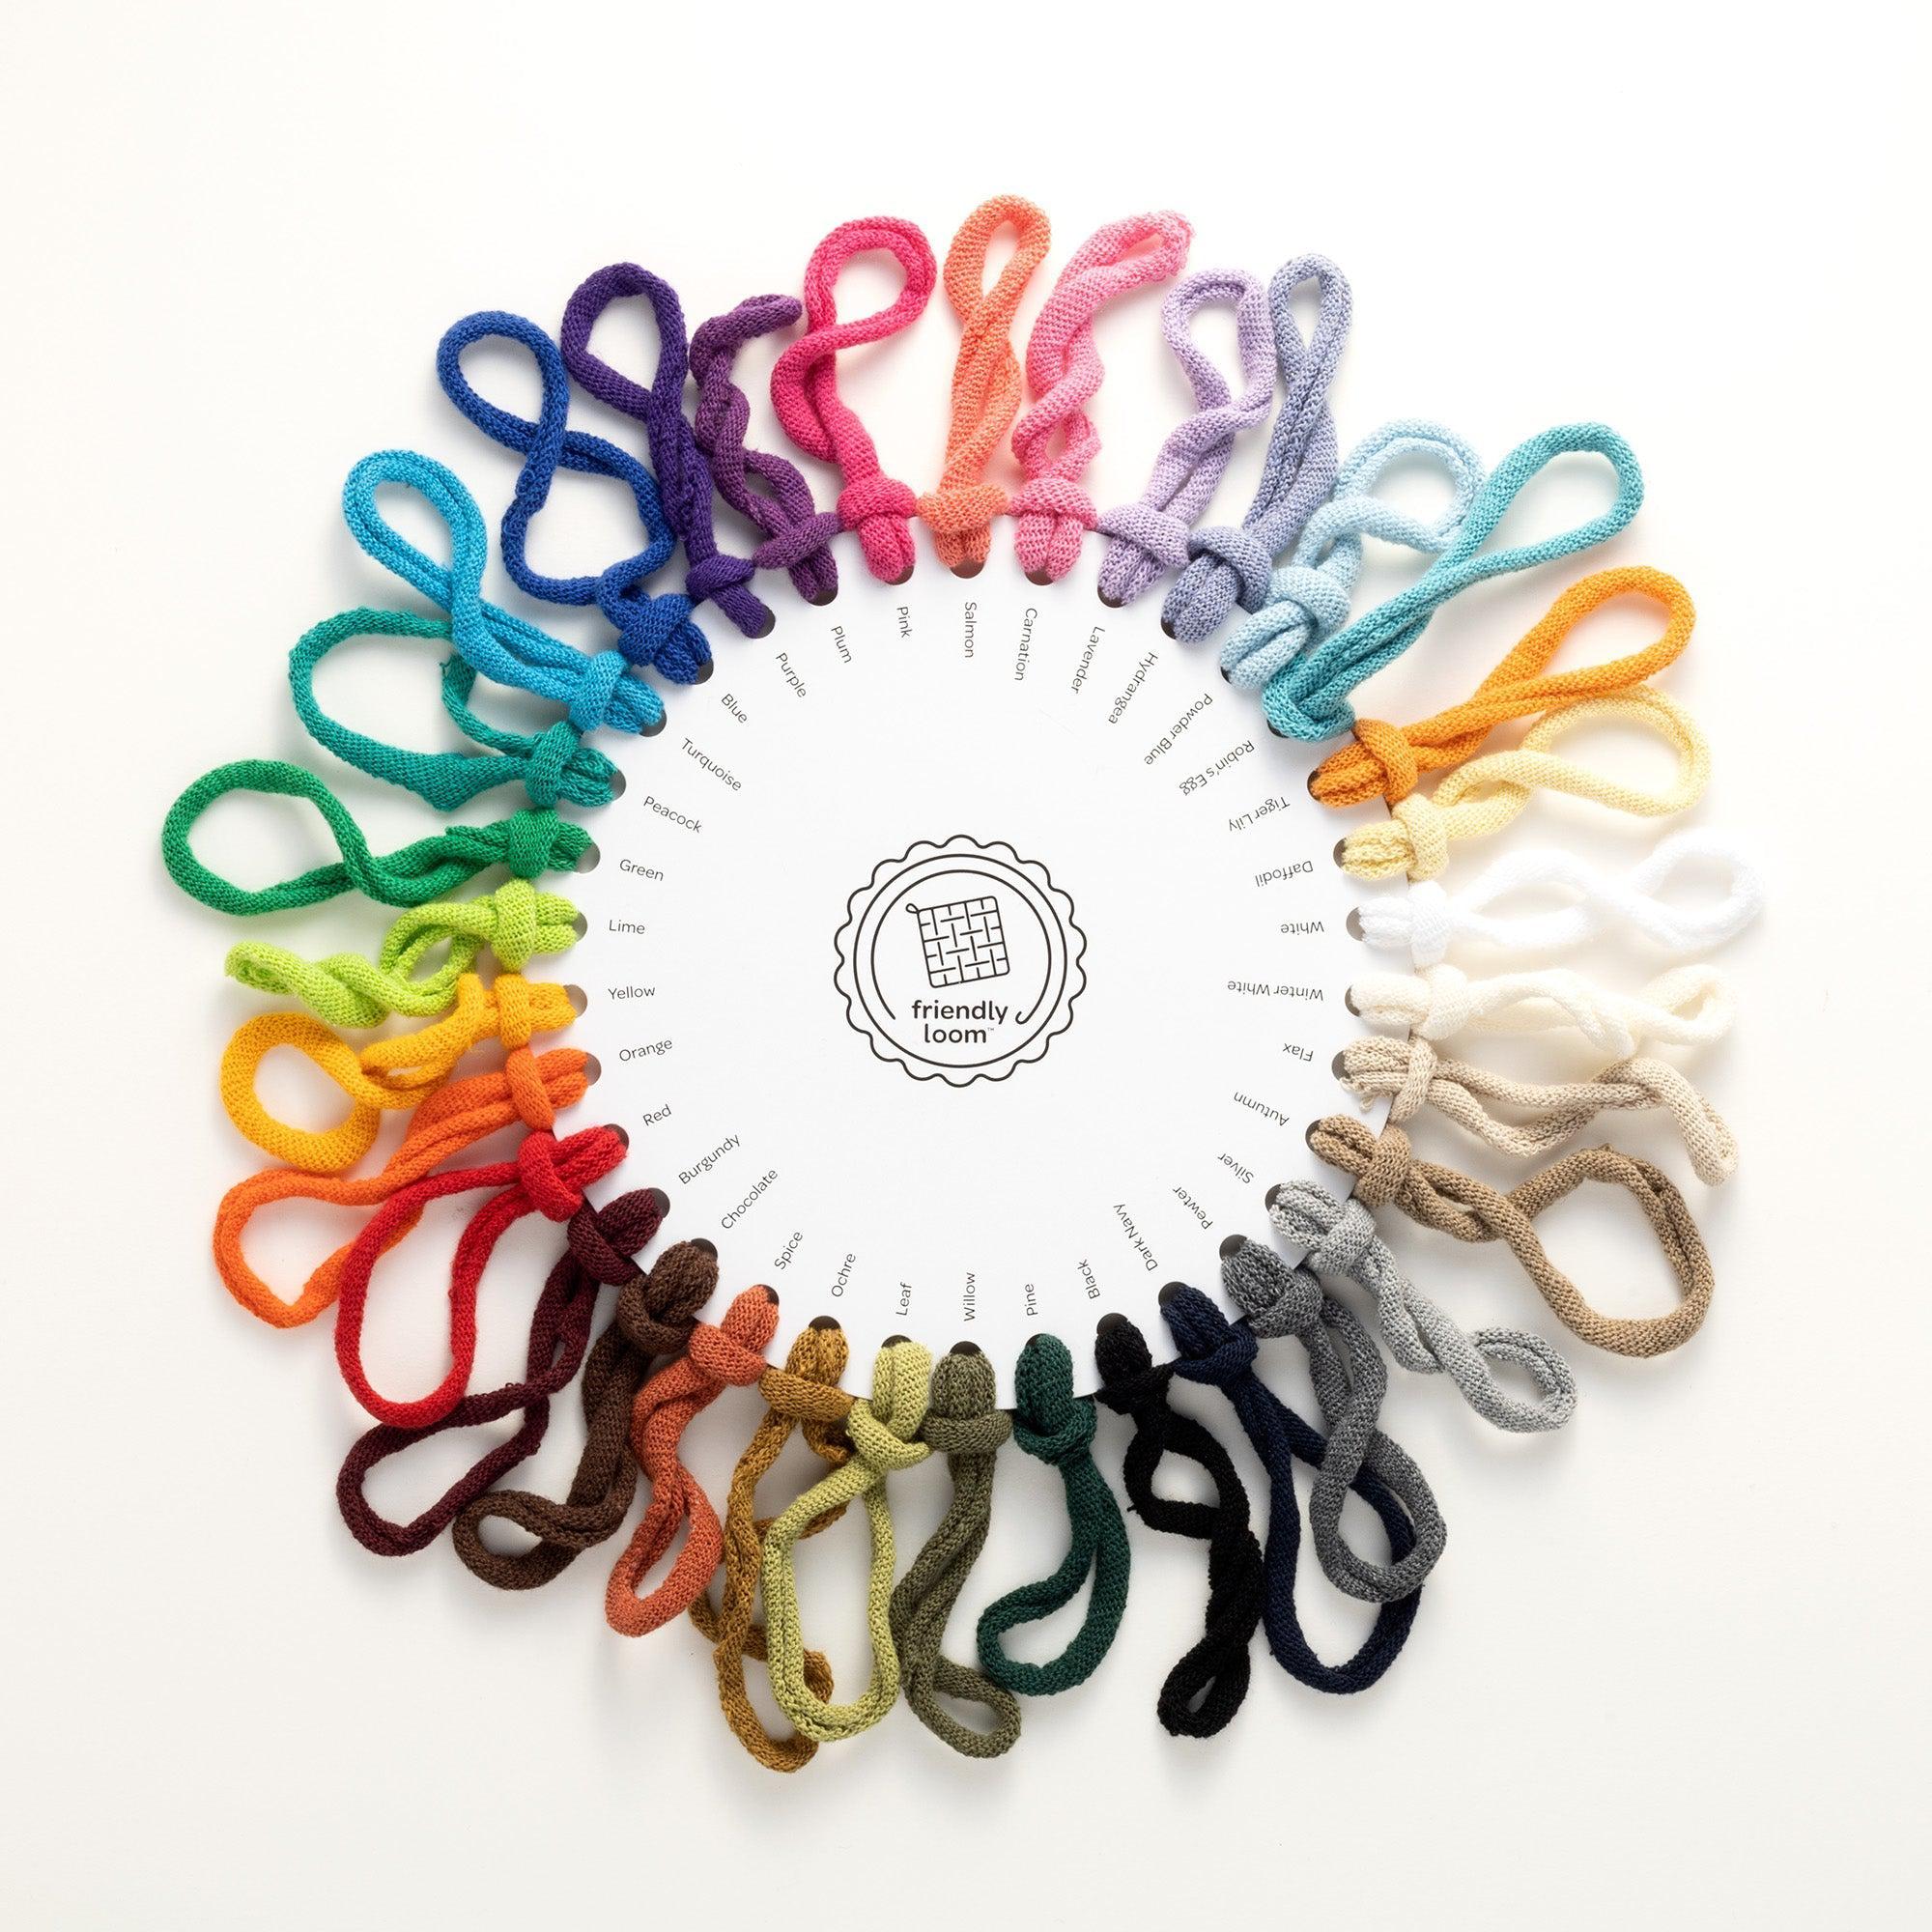 Lots A Loops - Tubes (Assorted Colors)